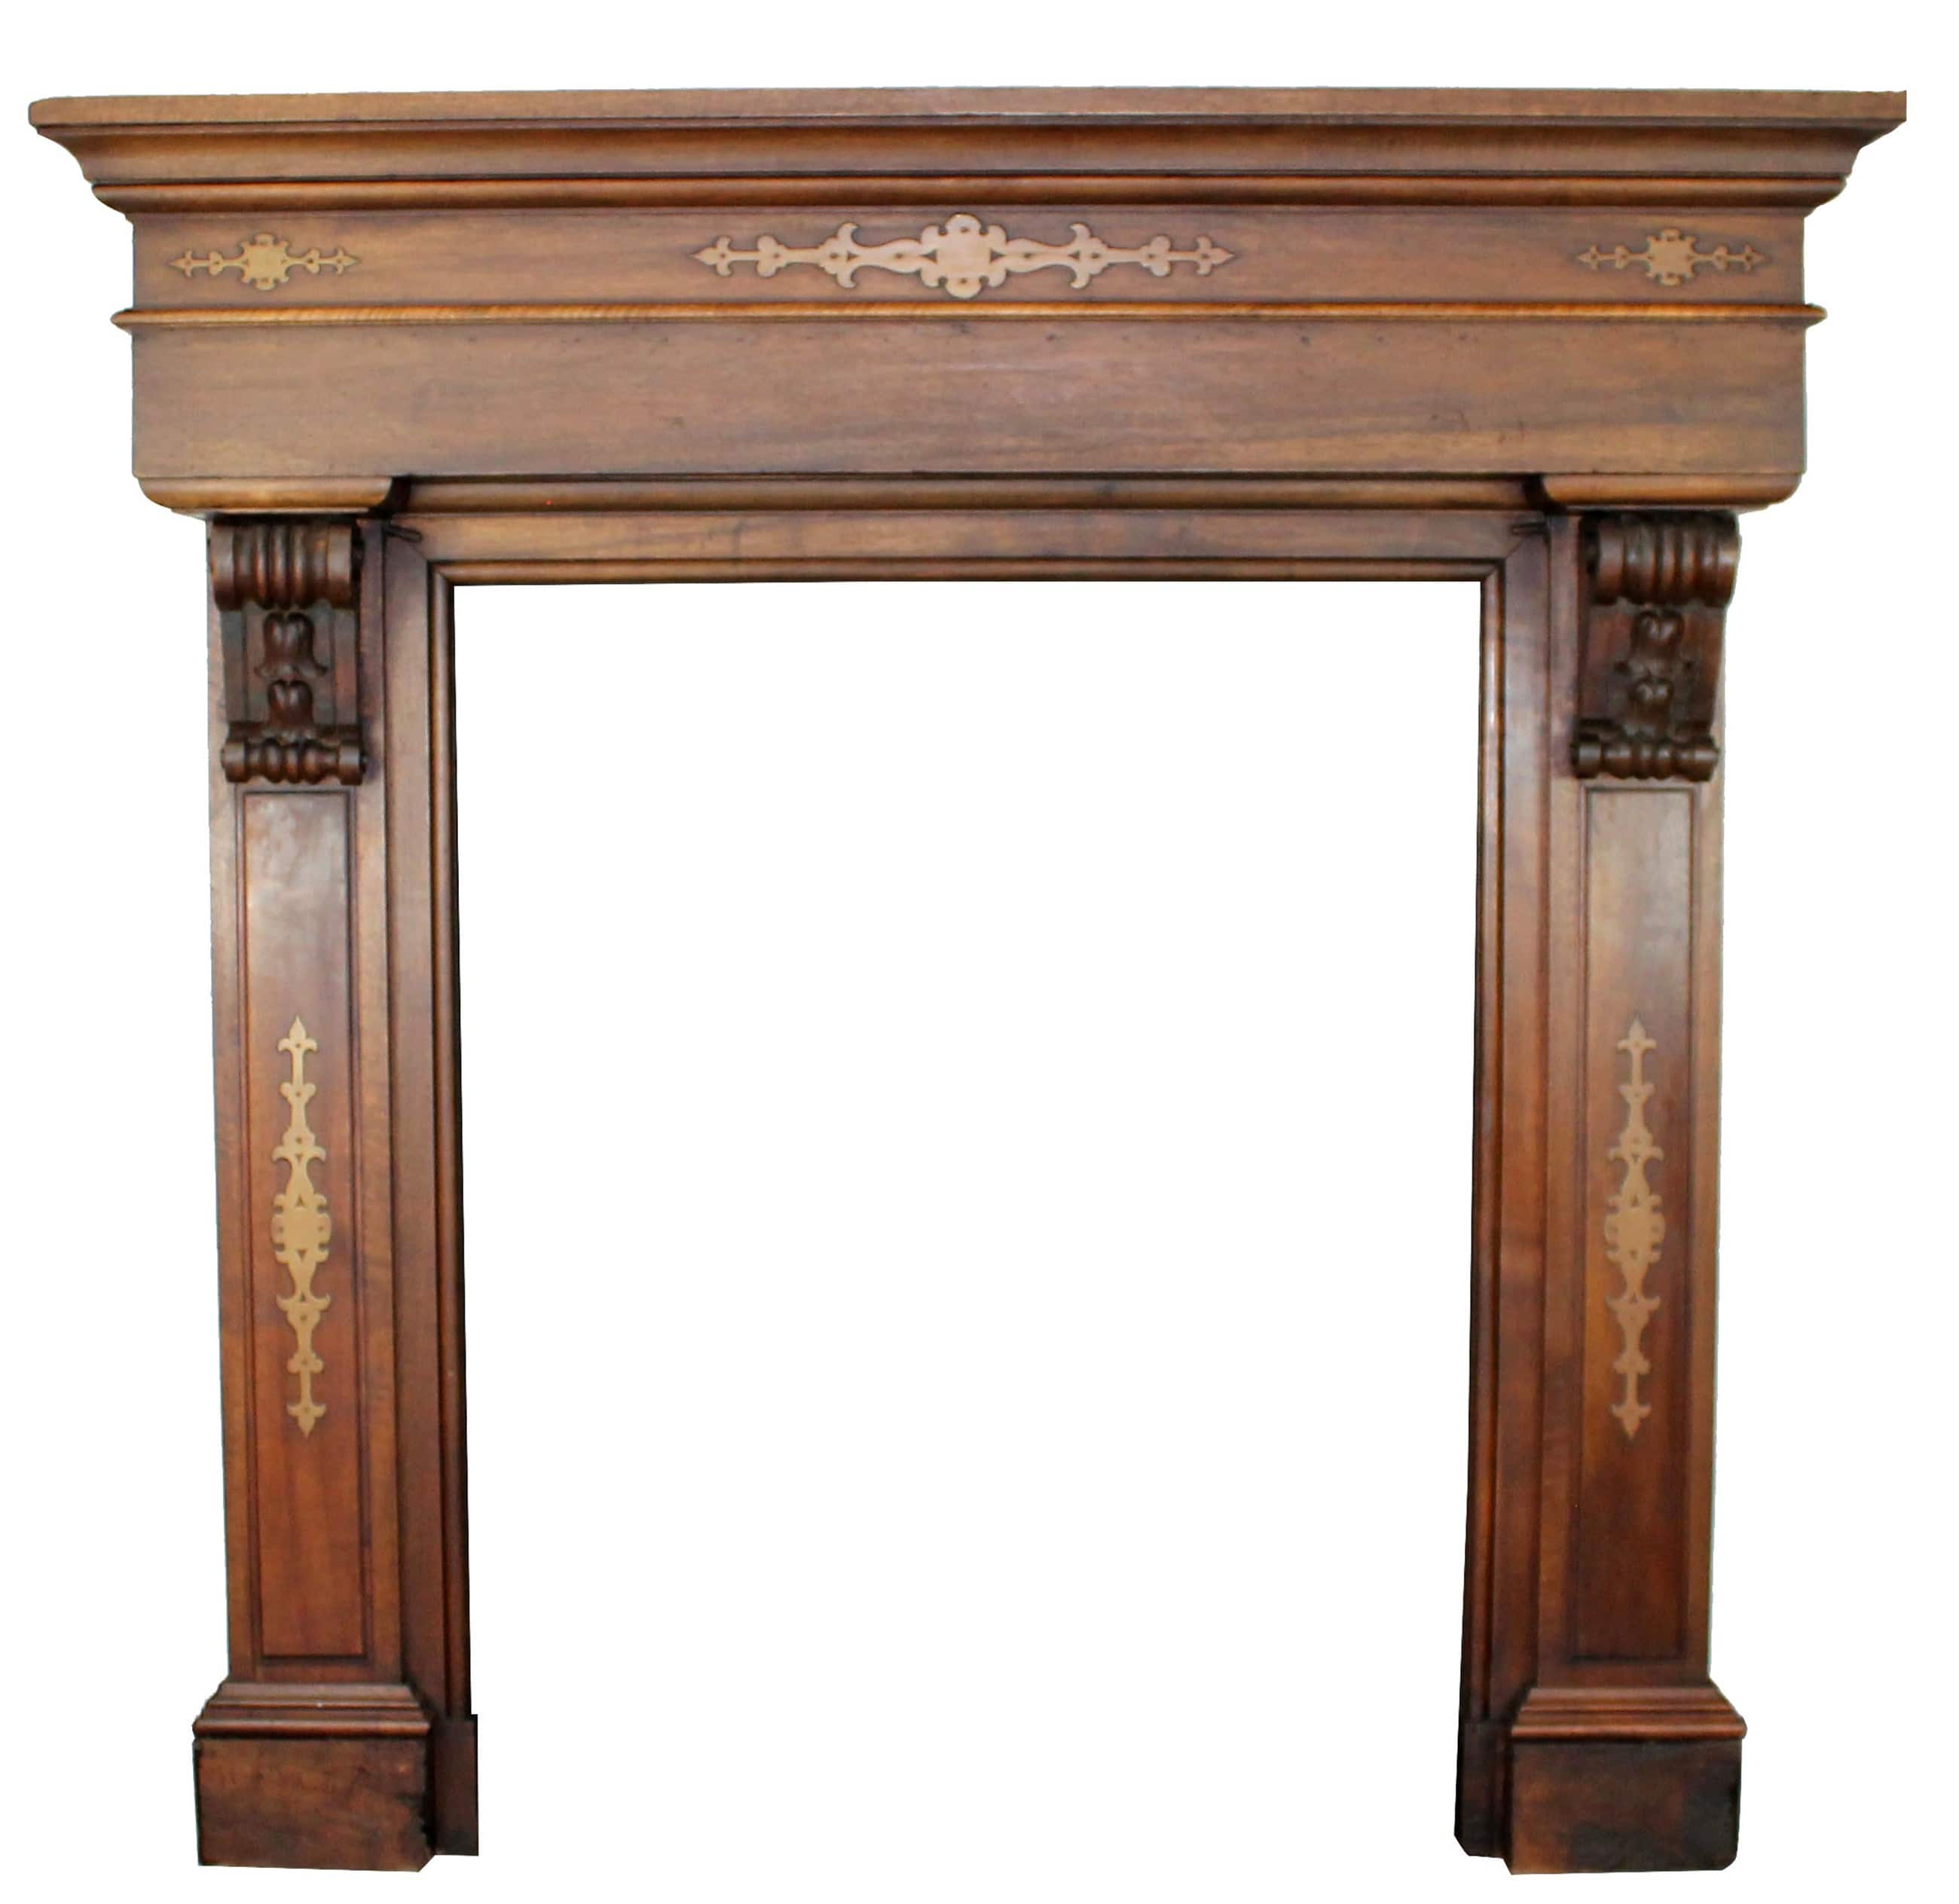 French fireplace mantel with iron detailing